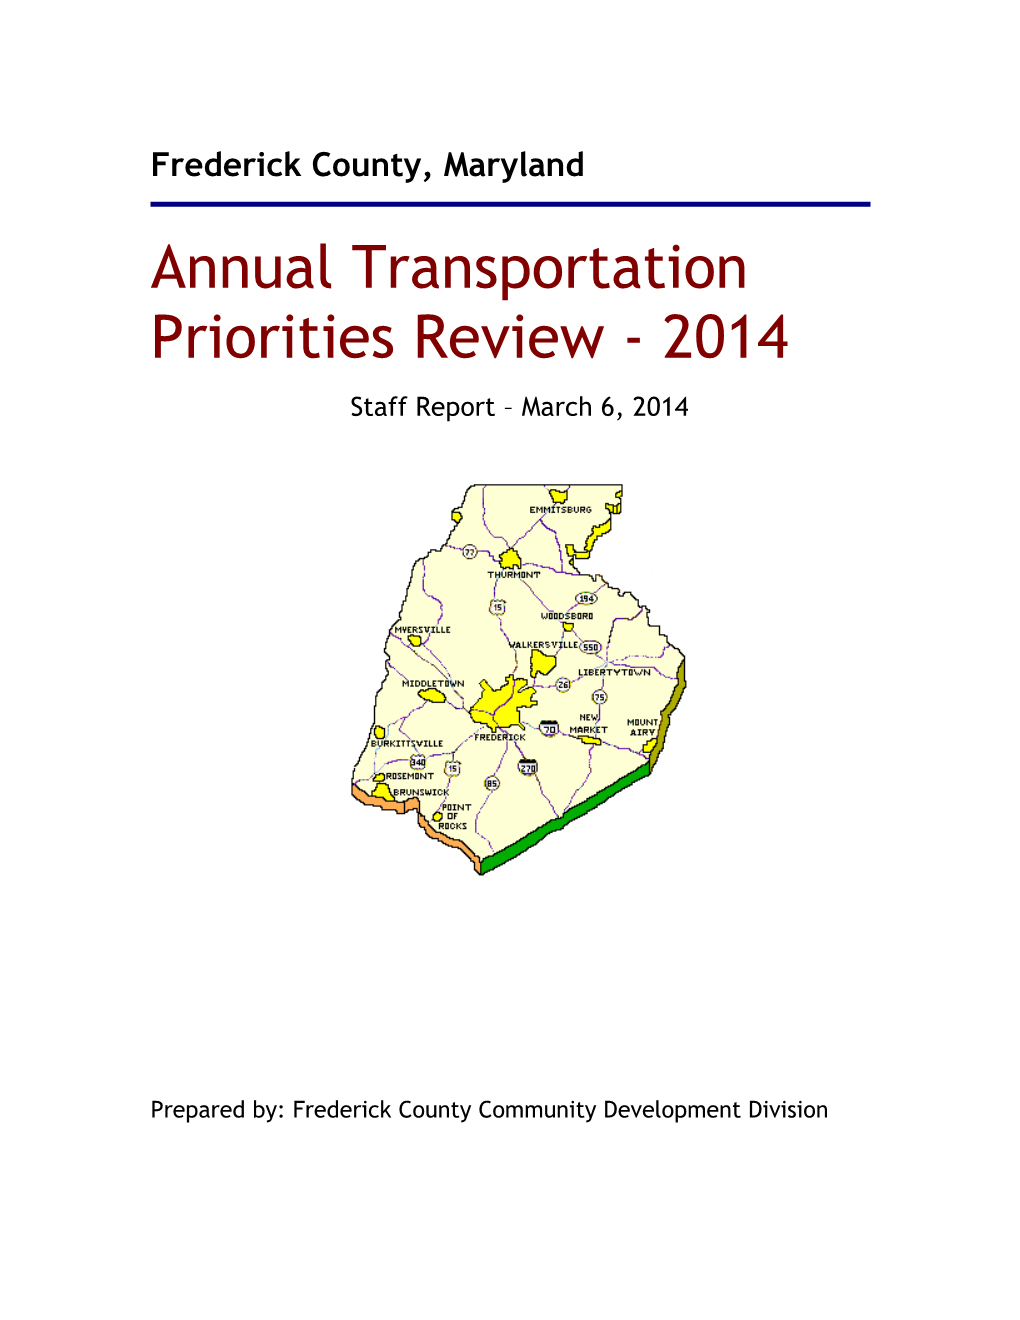 Frederick County Transportation Priorities